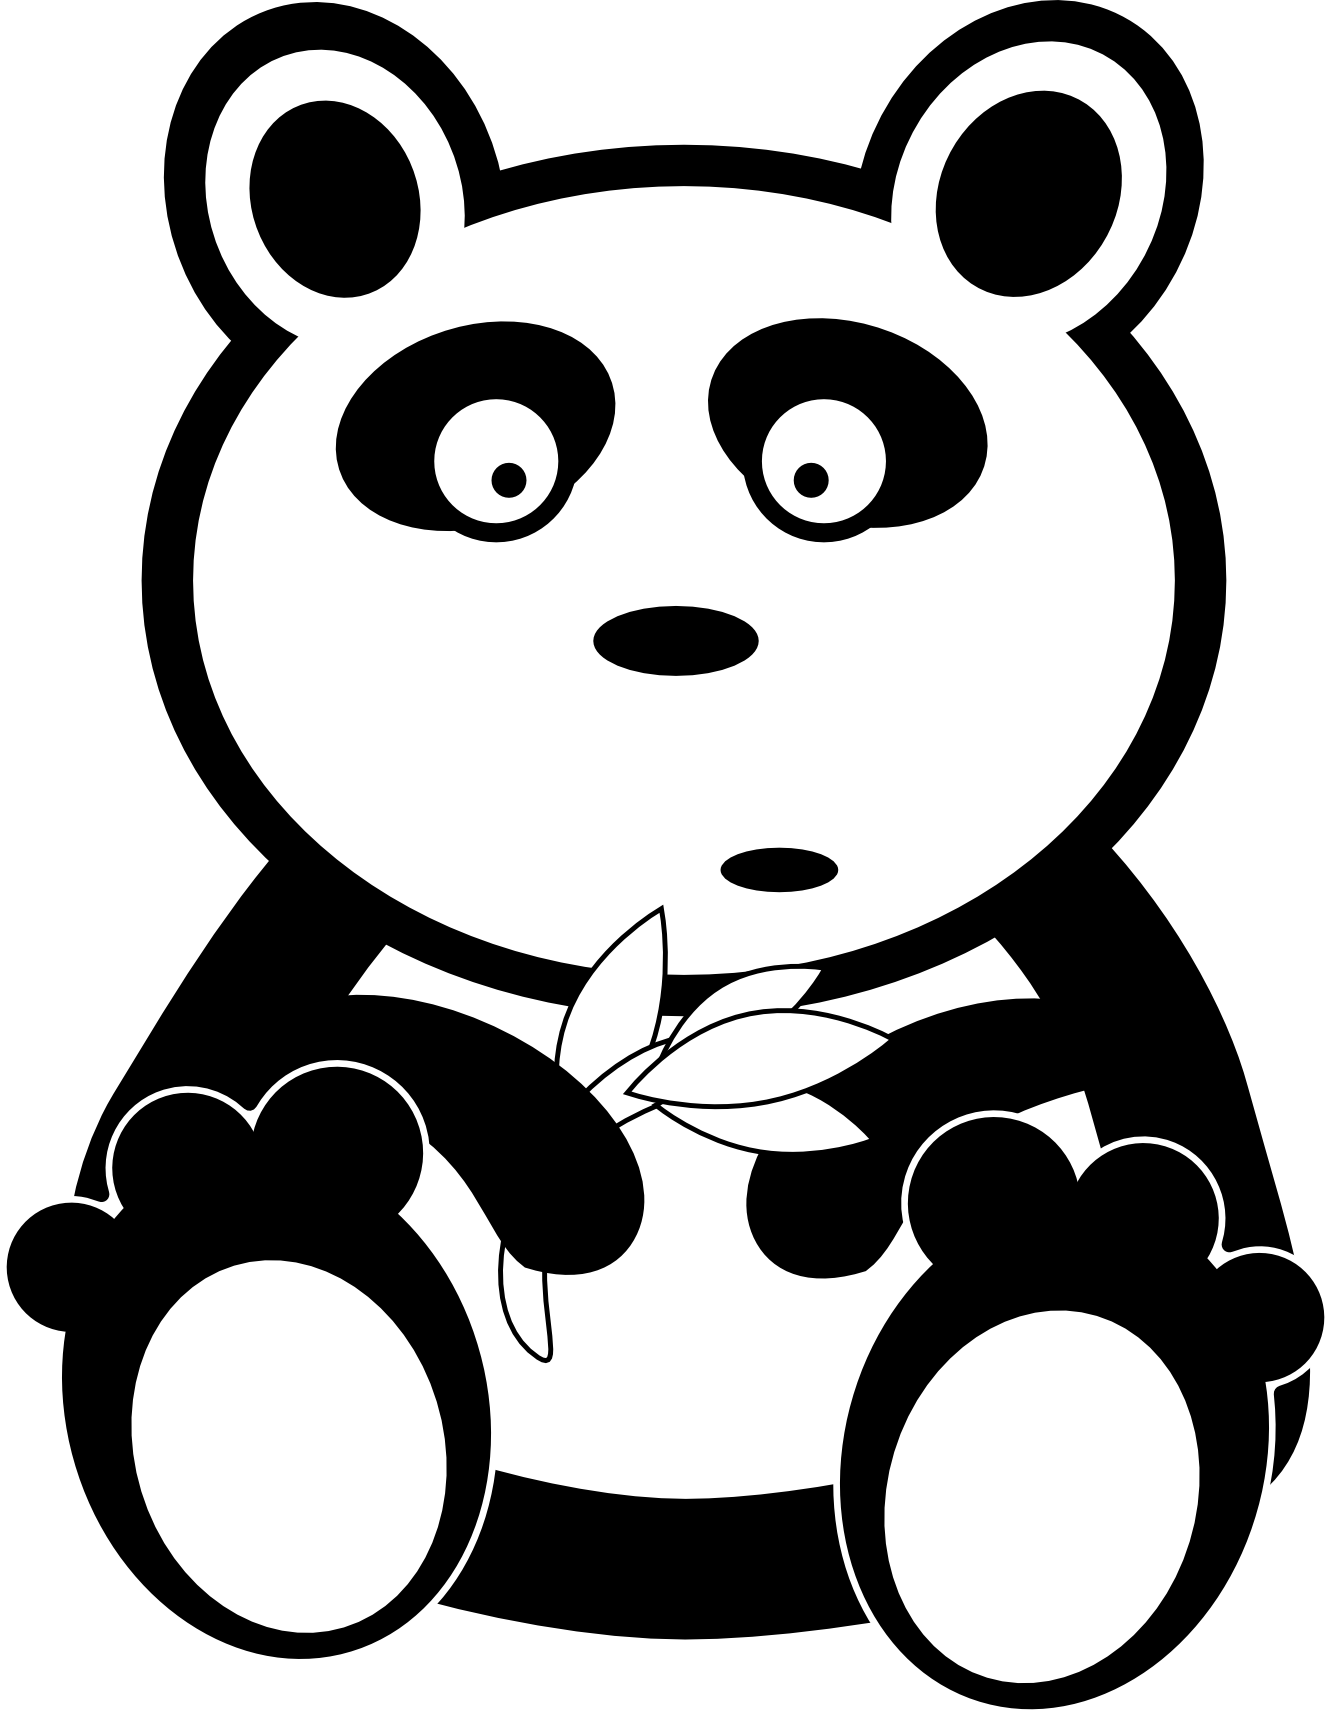 Clipart Animals   Clipart Panda   Free Clipart Images